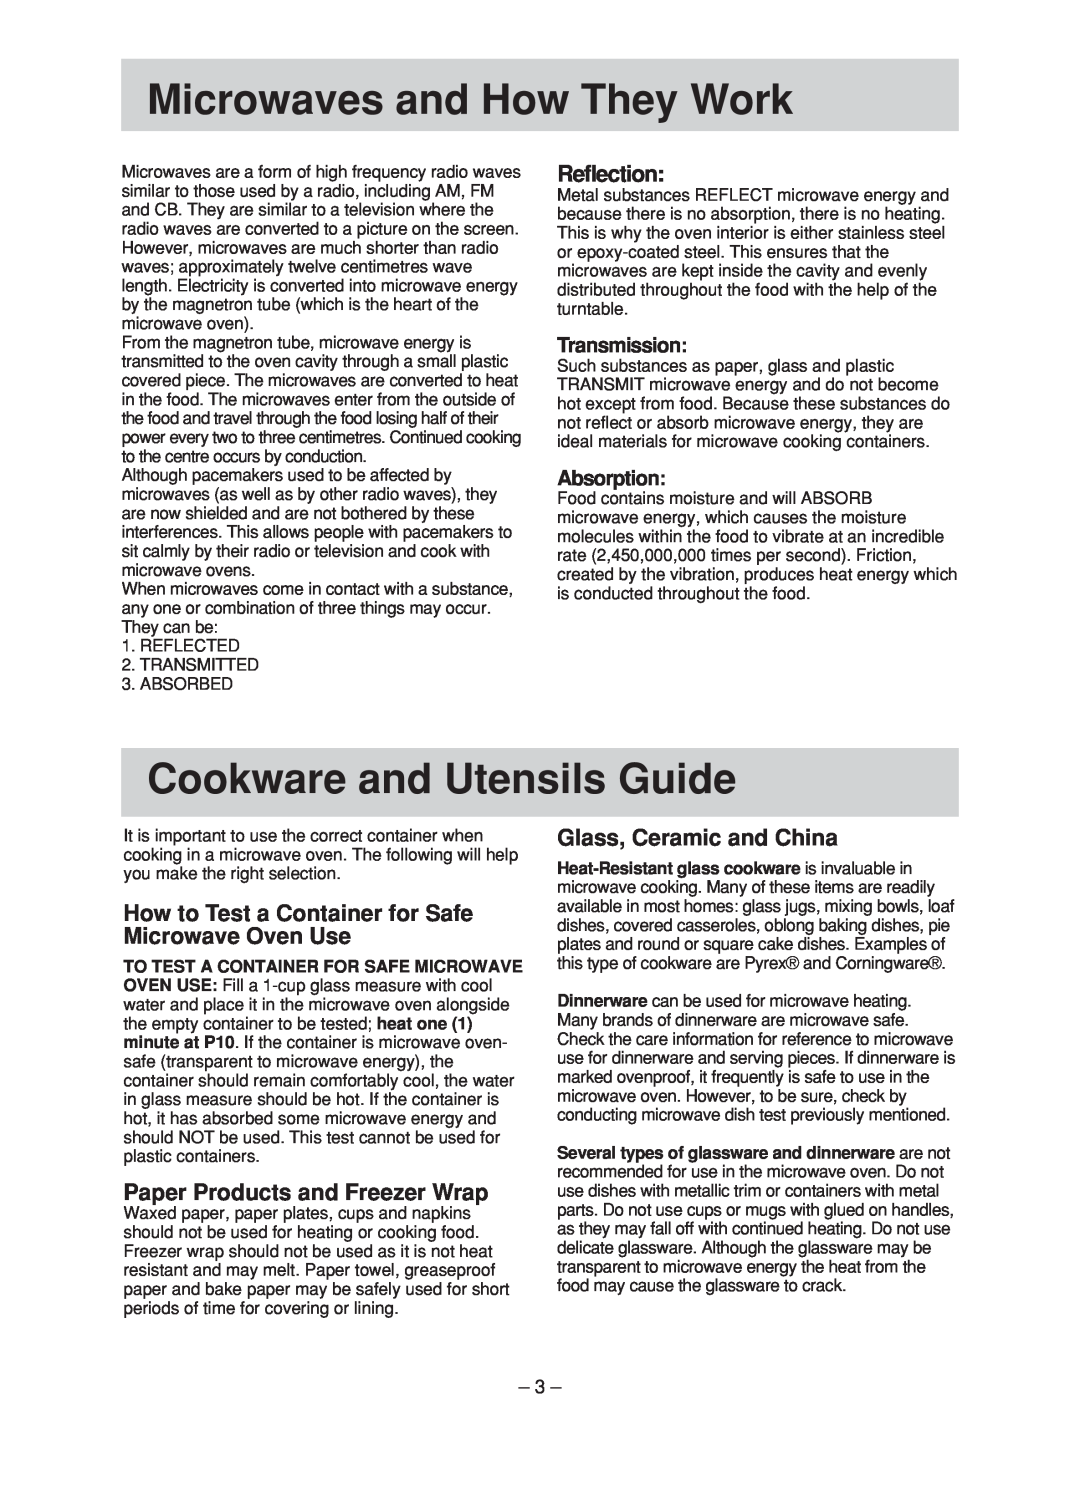 Panasonic NN-ST680S Microwaves and How They Work, Cookware and Utensils Guide, Reflection, Paper Products and Freezer Wrap 